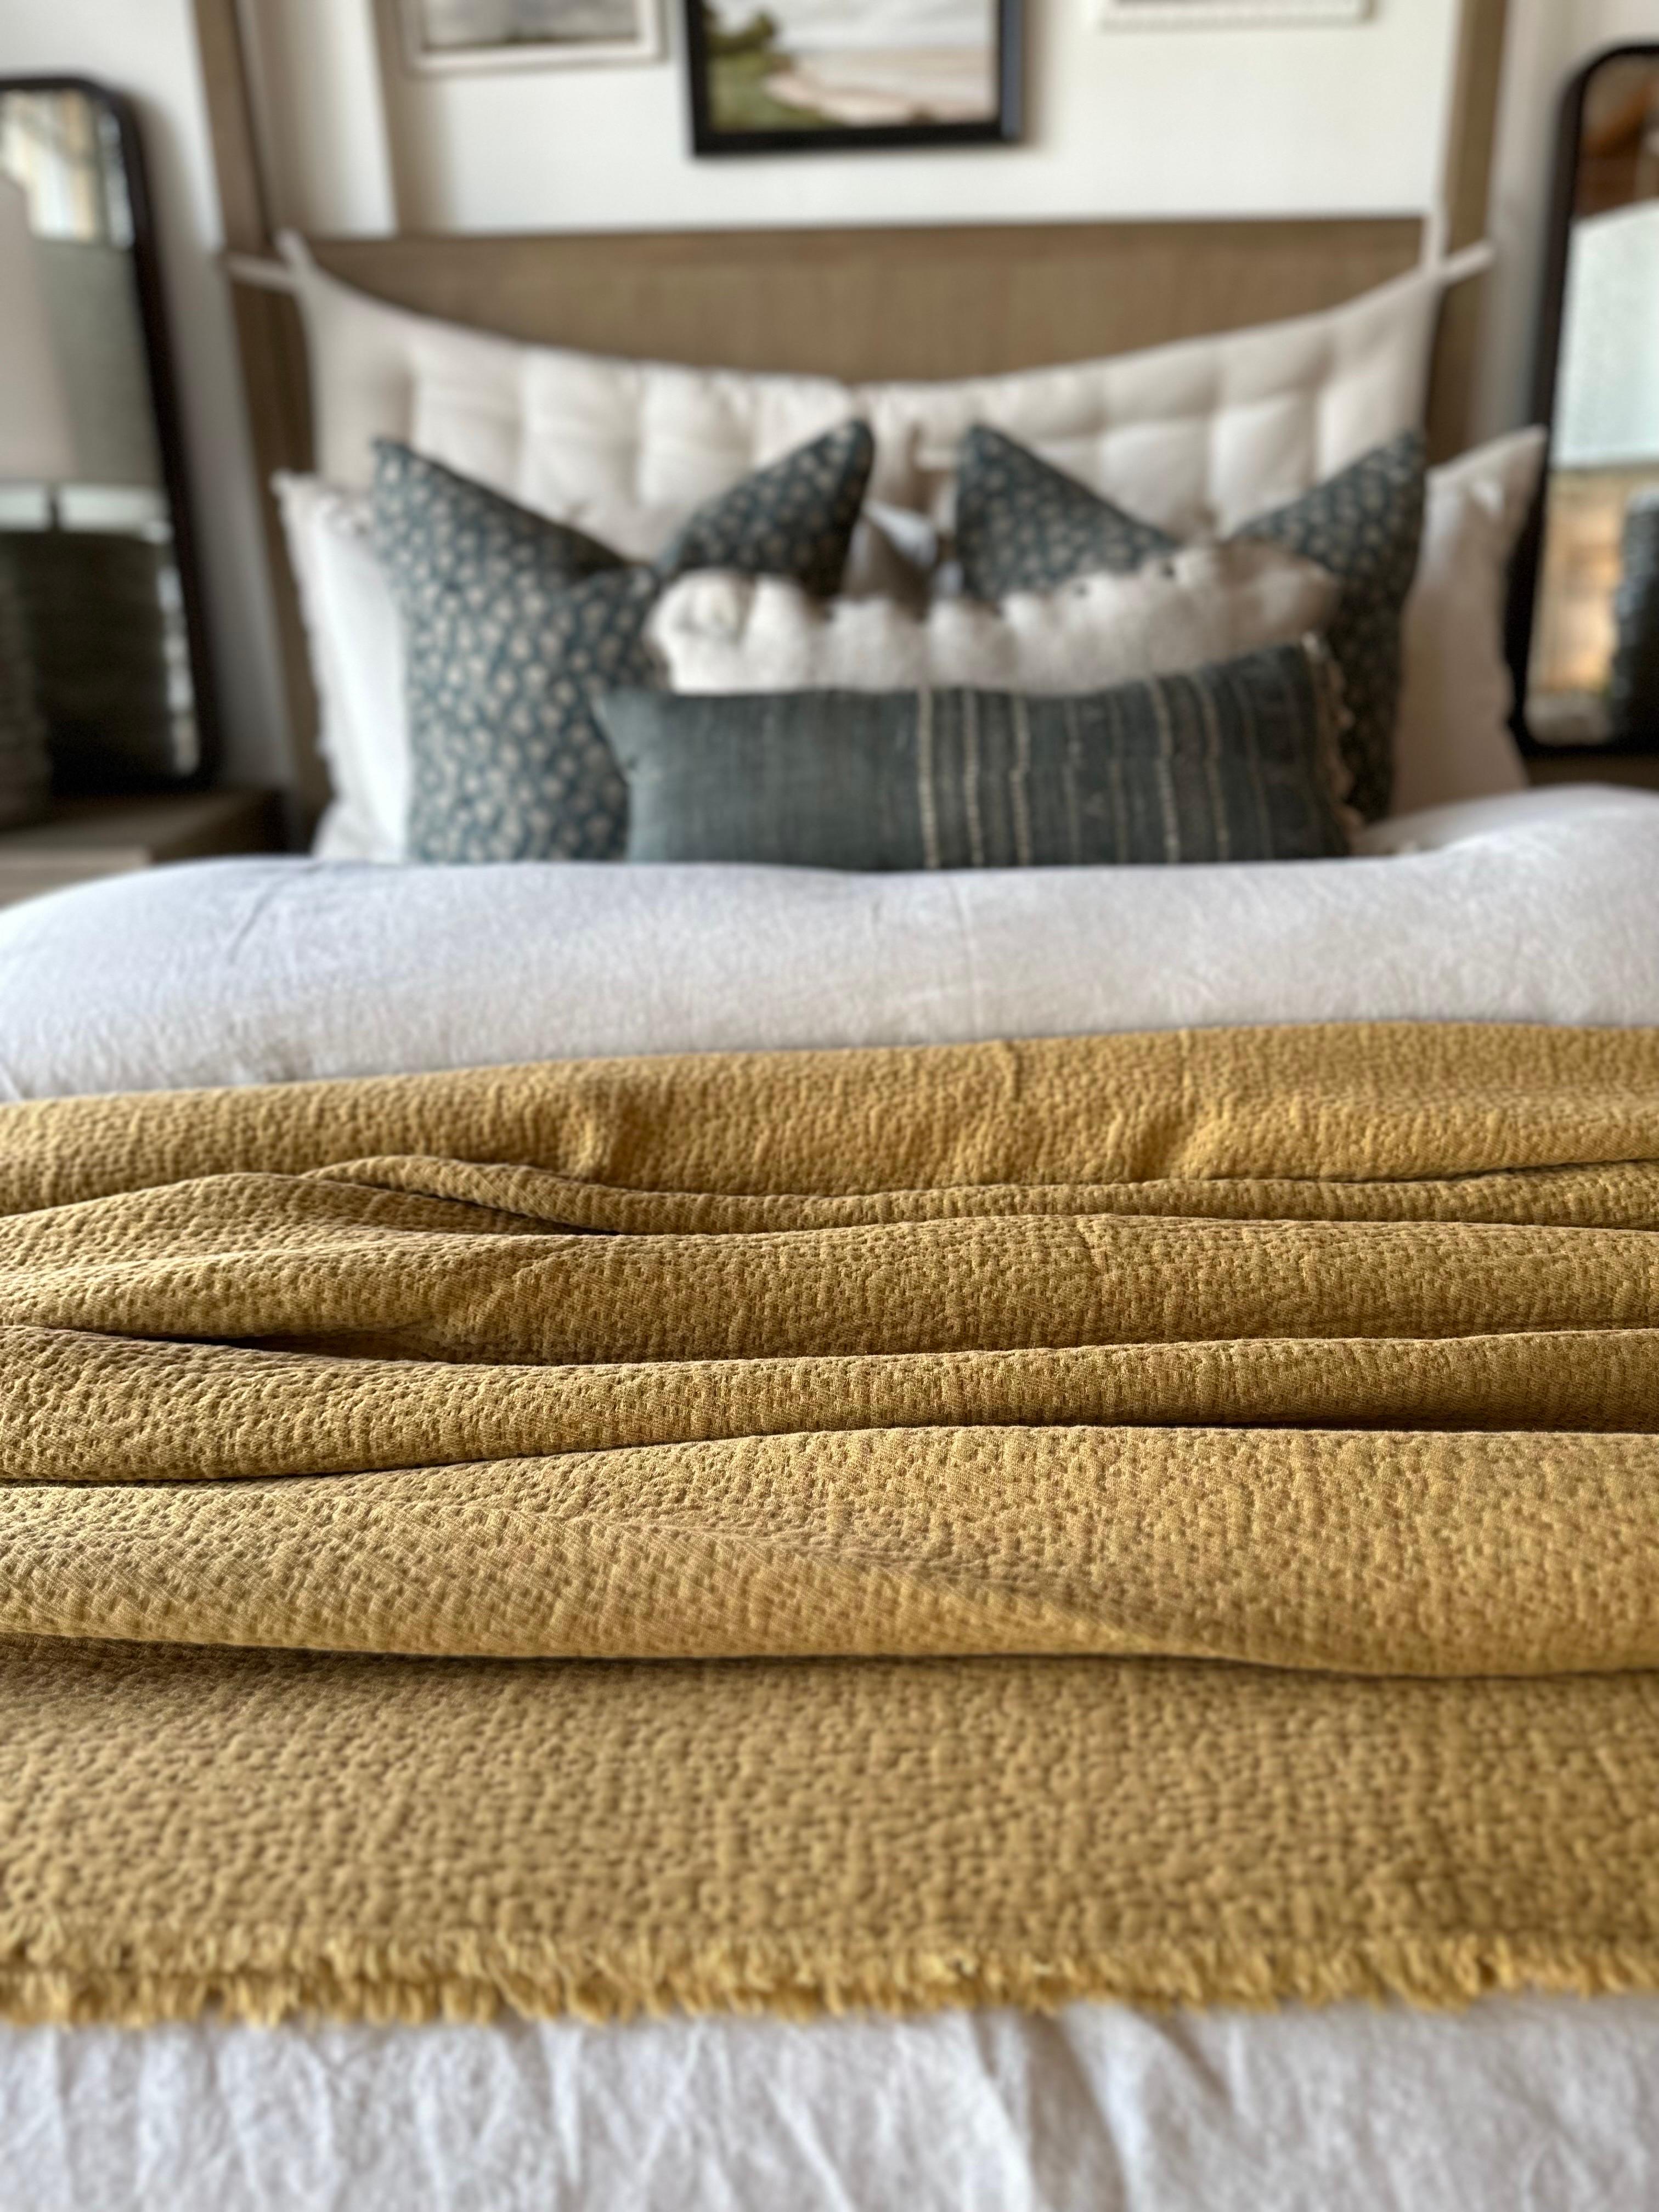 A soft plush cotton textured coverlet. Great to use as an accent at the end of the bed, or use as a coverlet.
Color: Miele ( a soft dijon mustard with brown tone)
Size : 94x107
Large Size can accomodate a queen size or king size bed.
Machine